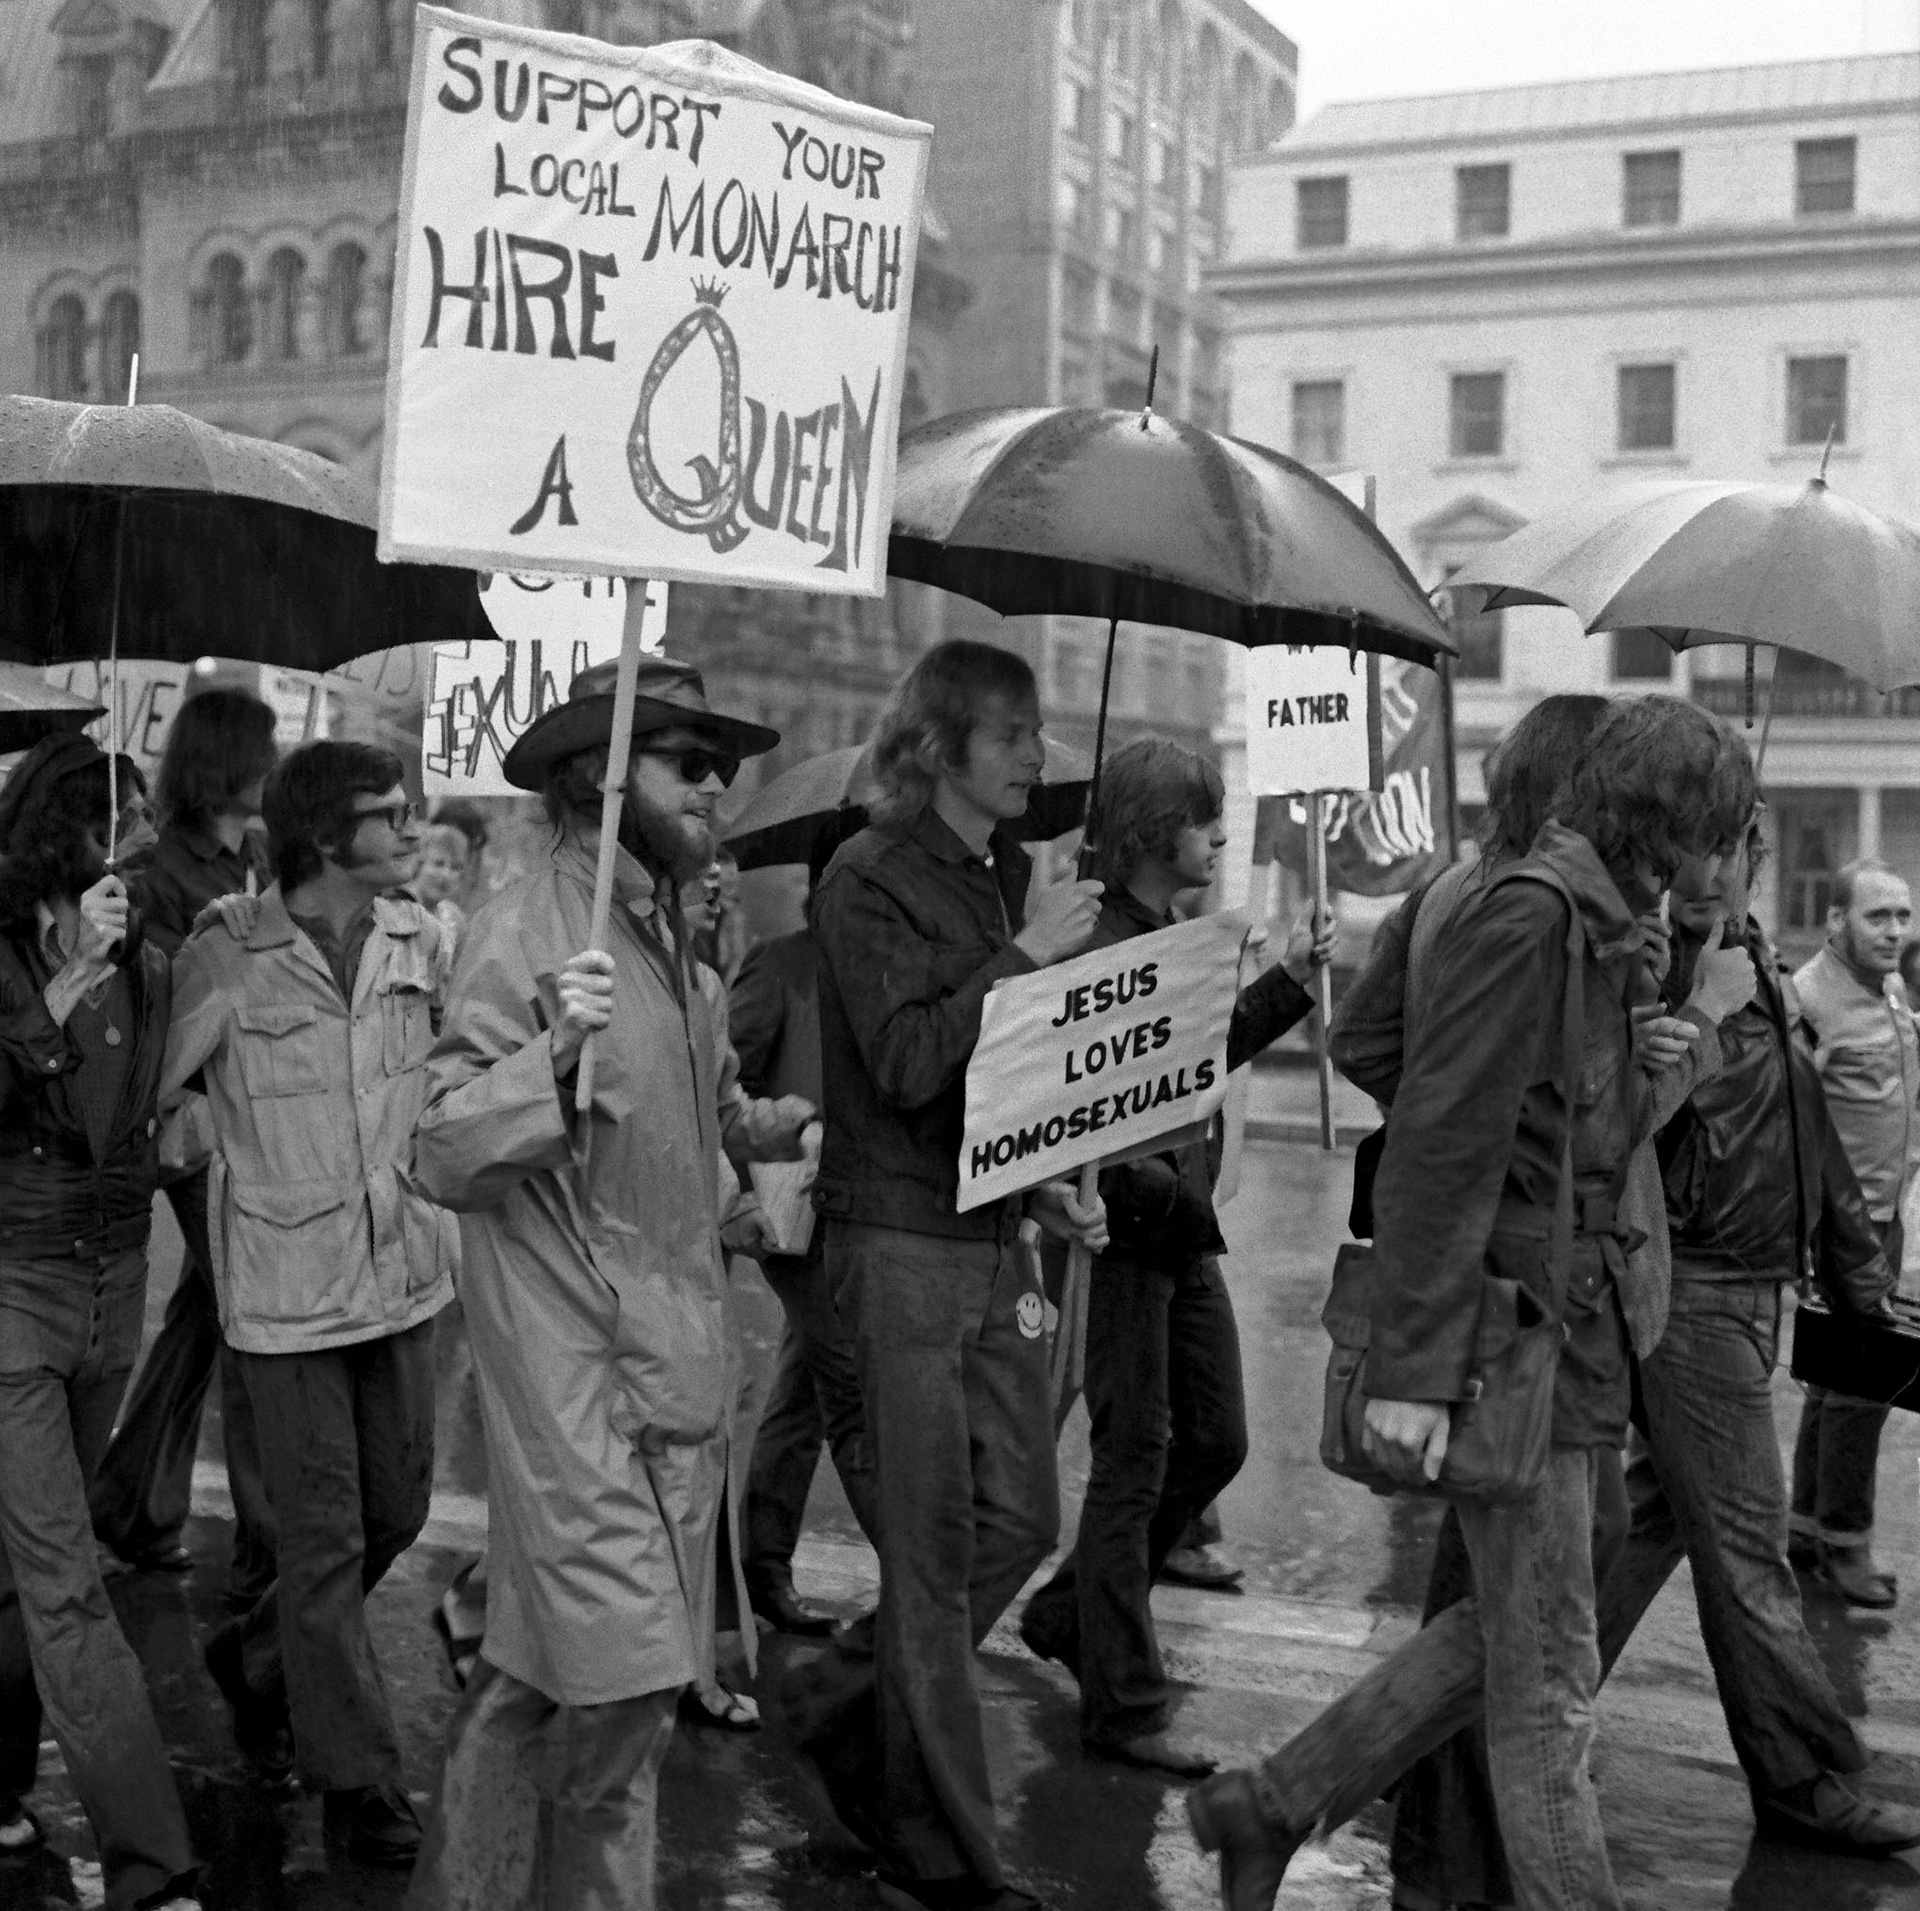 A black-and-white photo of a protest march.